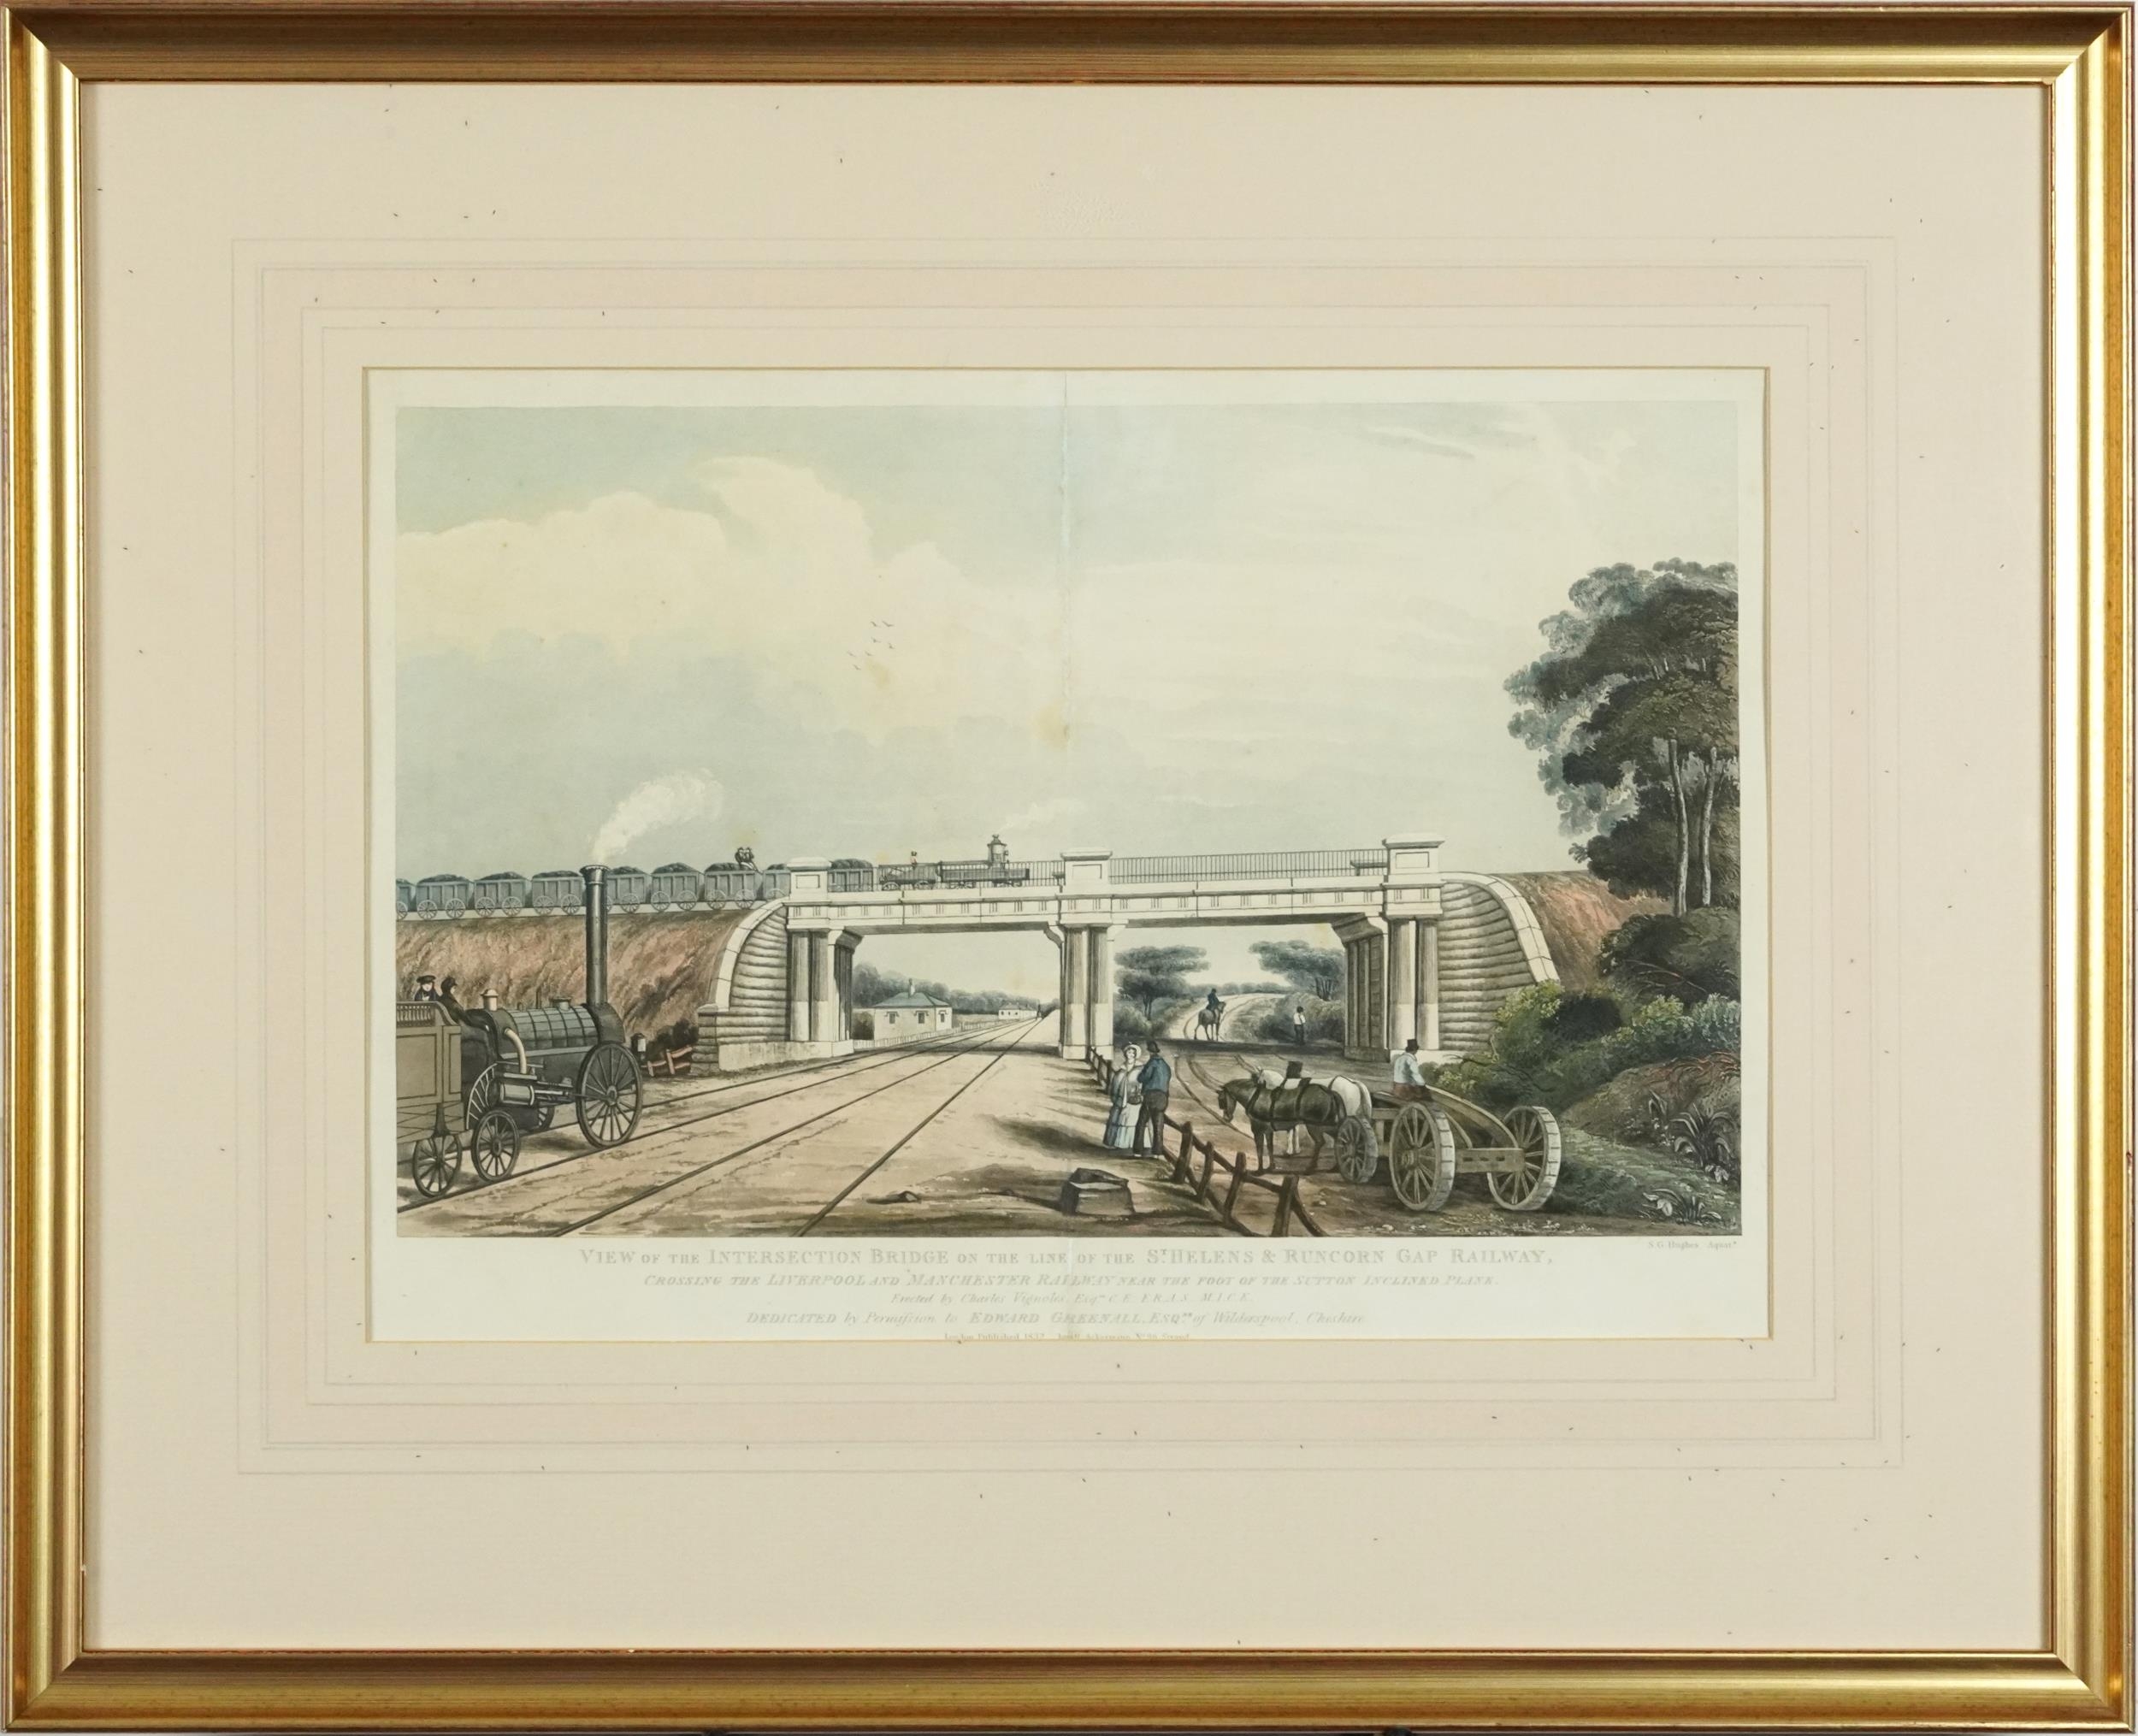 View of the intersection bridge on the line of the St Helen's and Runcorn Gap railway, early 19th - Image 2 of 4